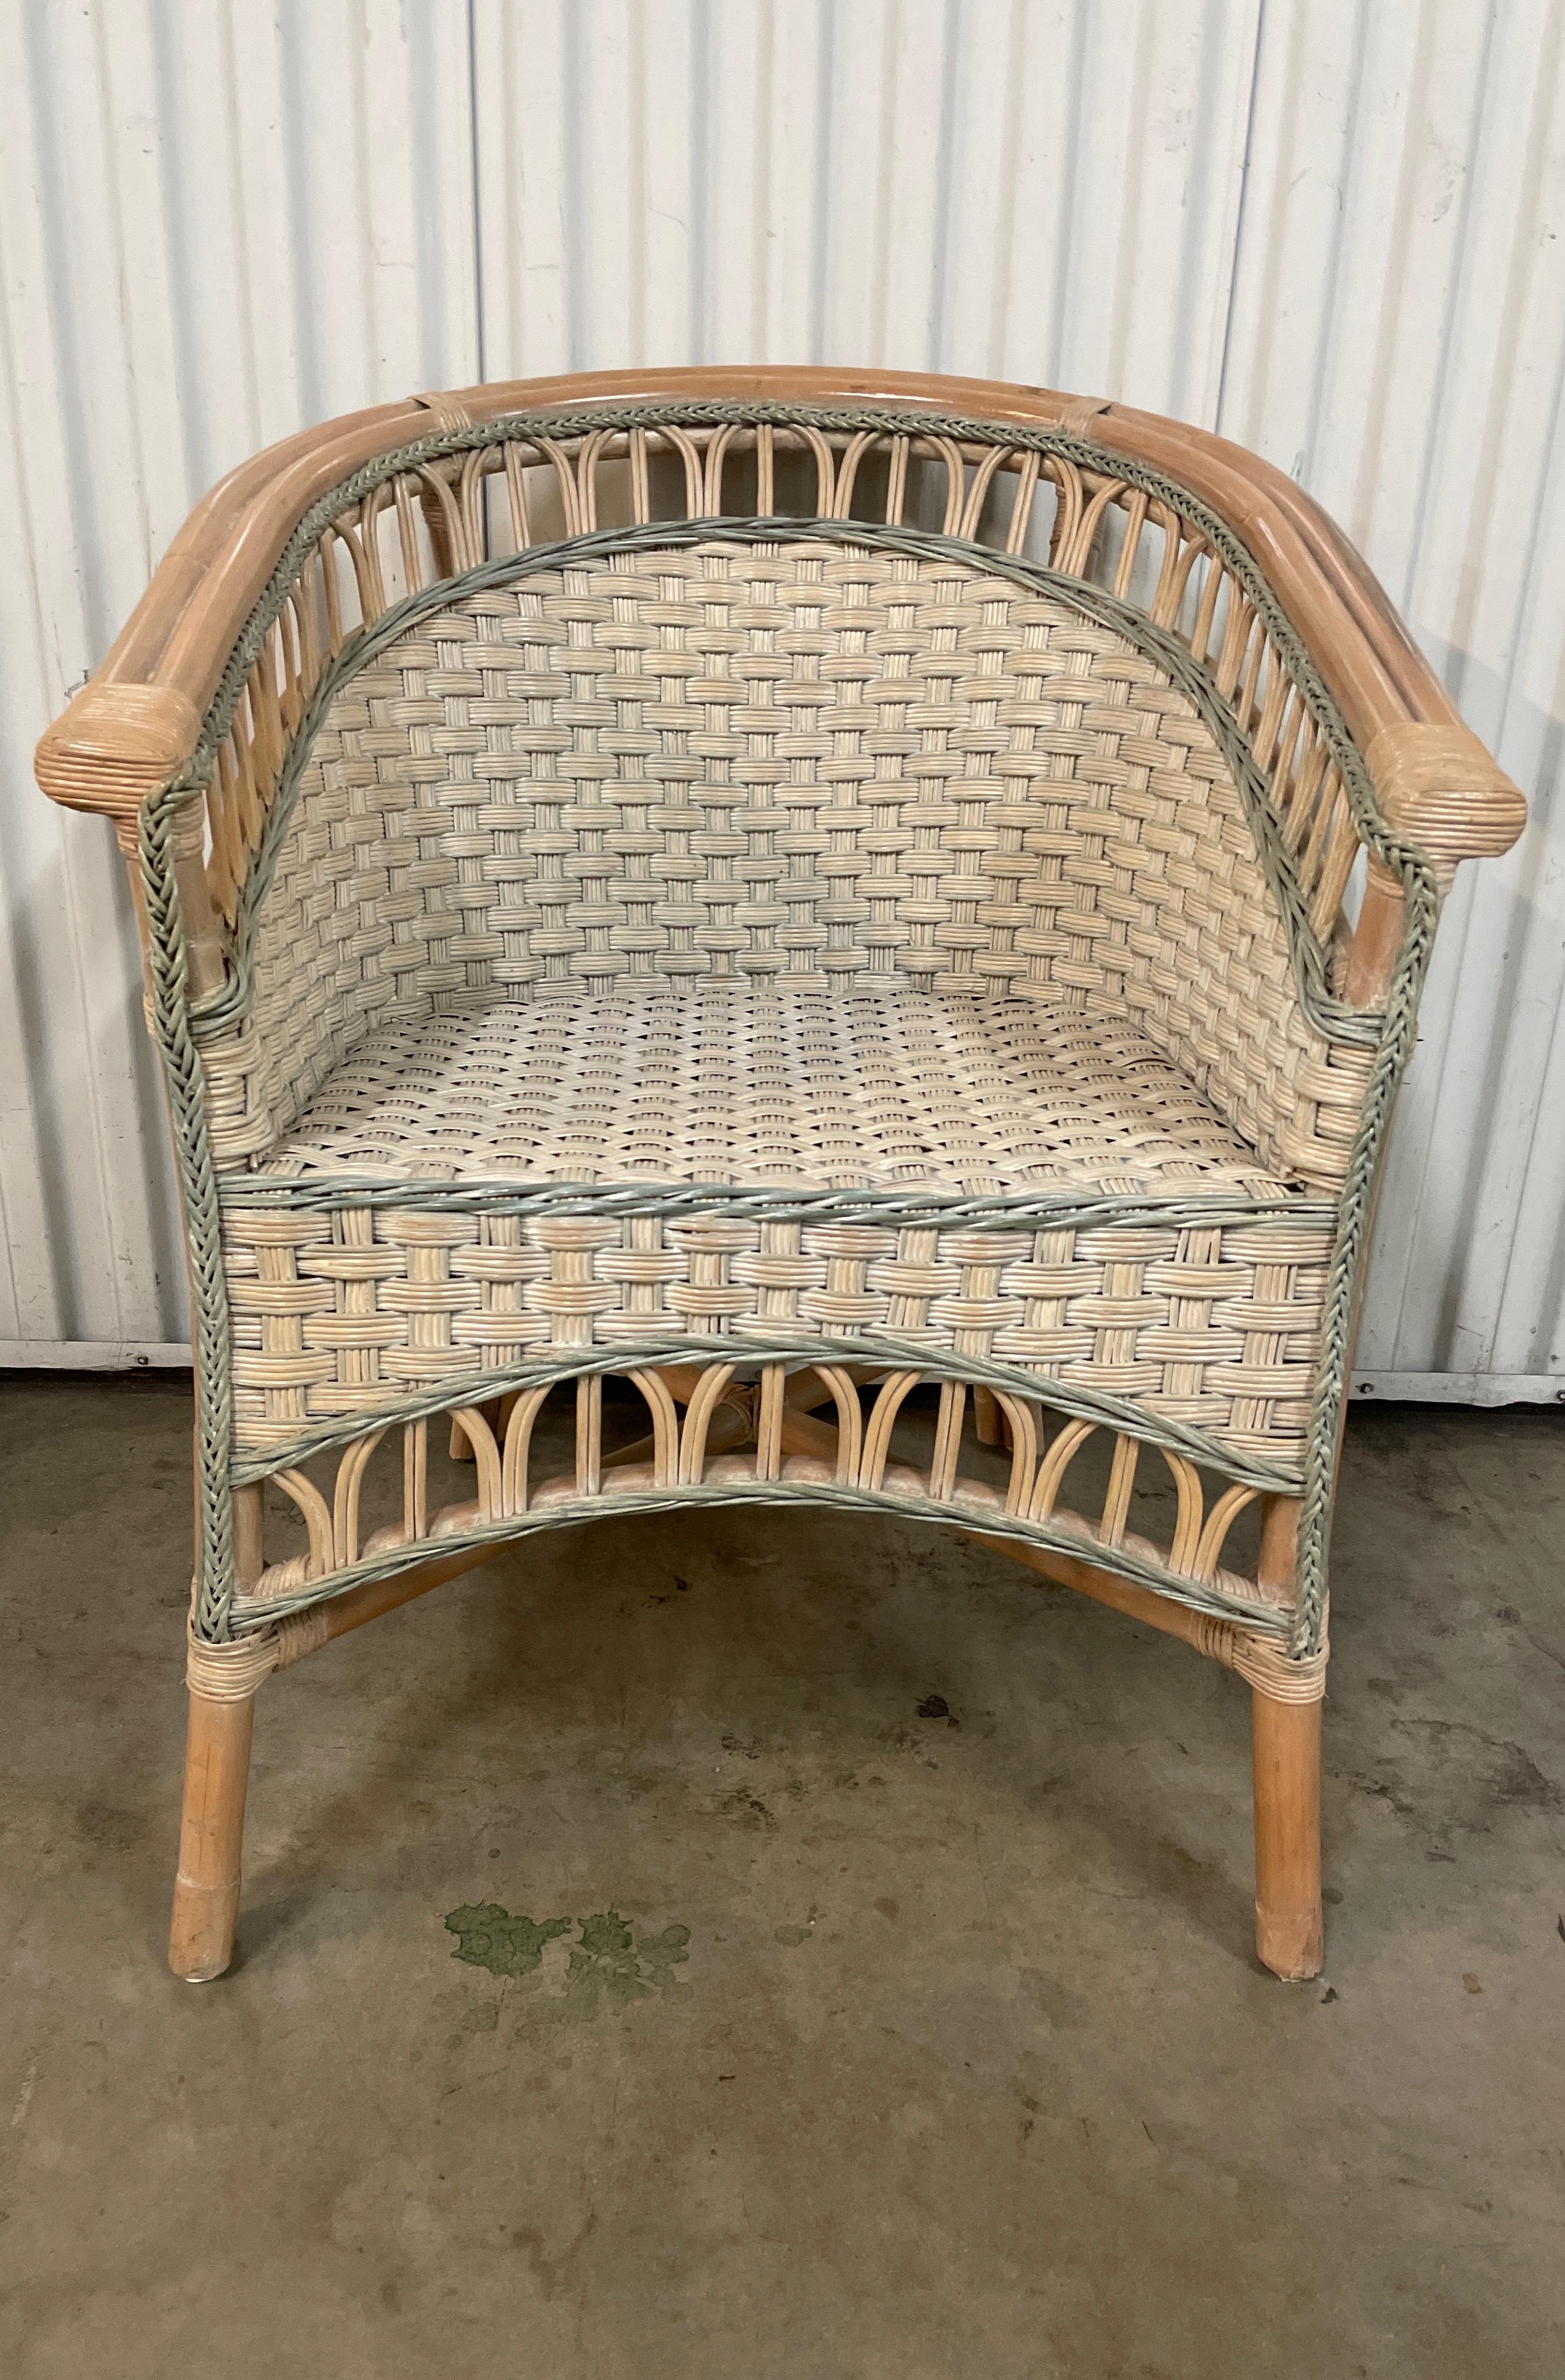 Painted woven wicker & bamboo chair by Palacek.